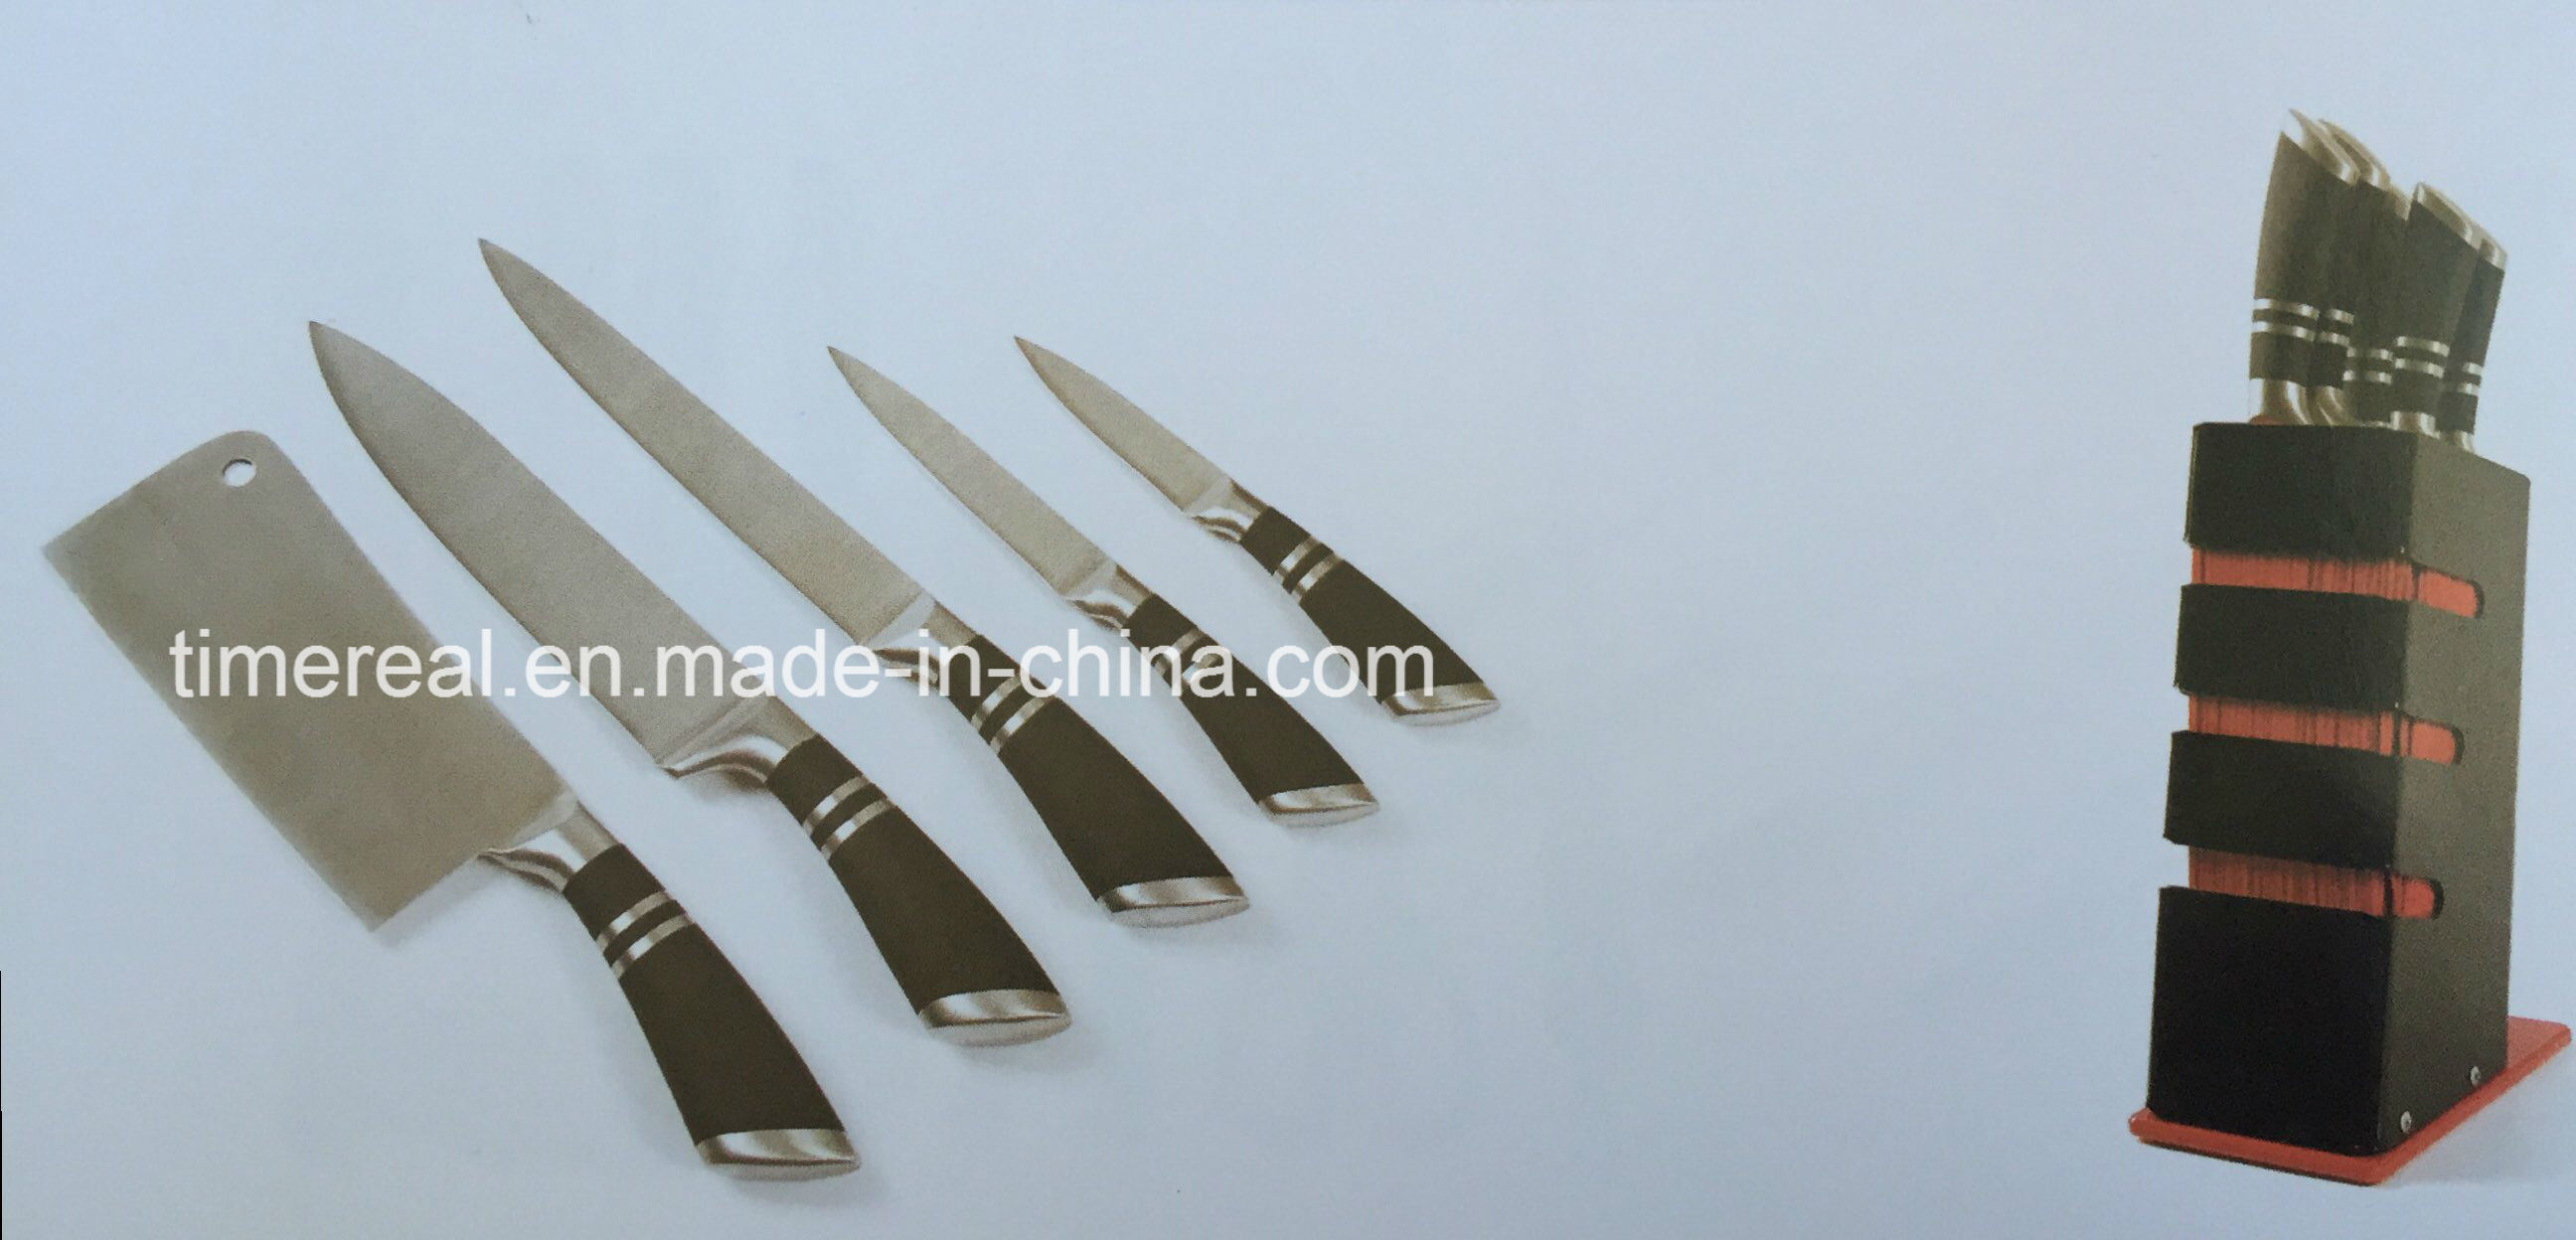 Stainless Steel Kitchen Knives Set with Painting No. Fj-0047